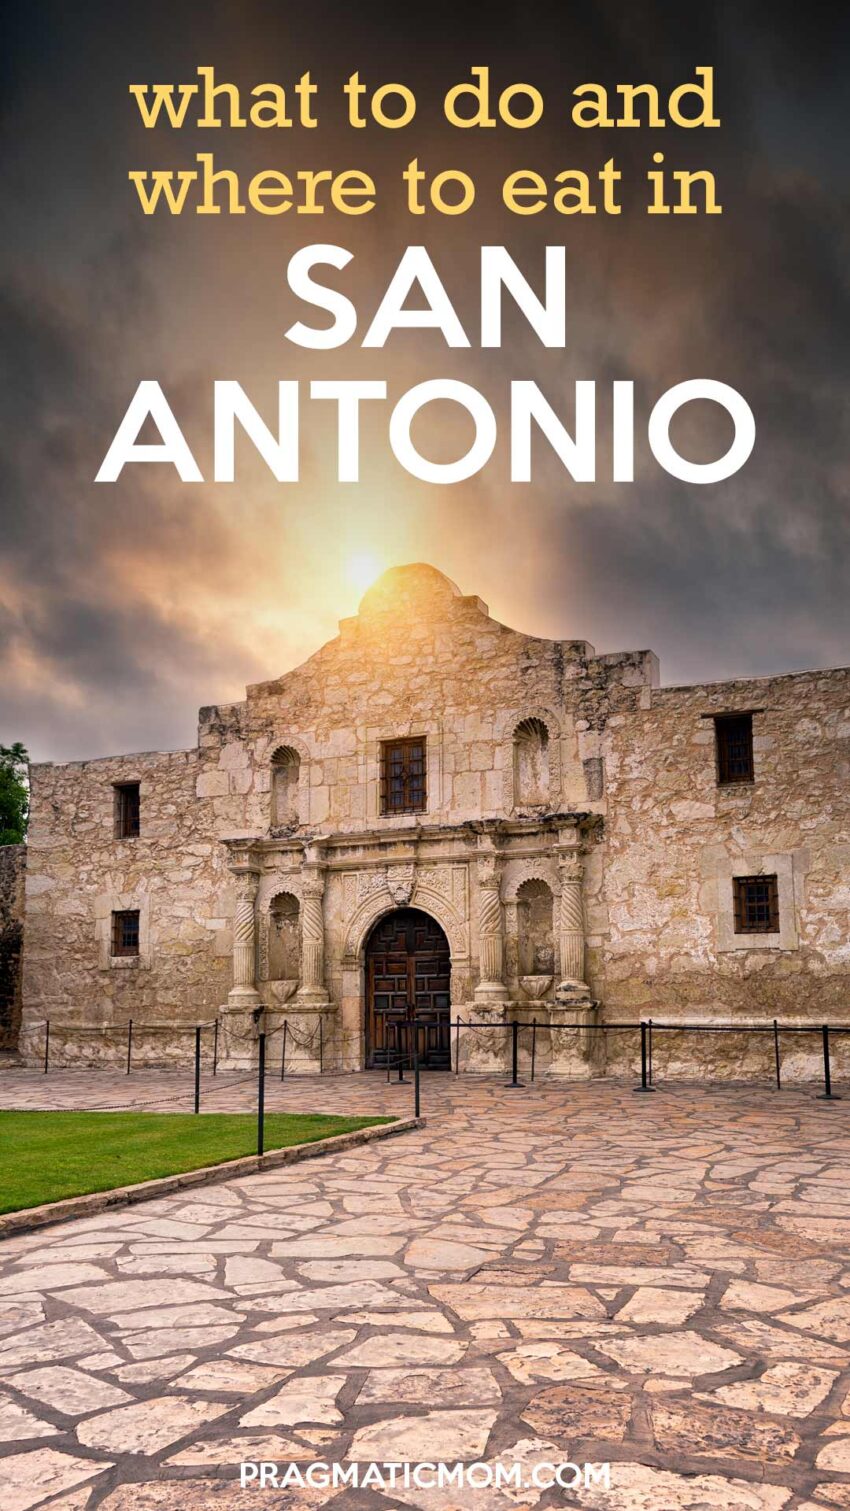 What To Do and Where To Eat in San Antonio